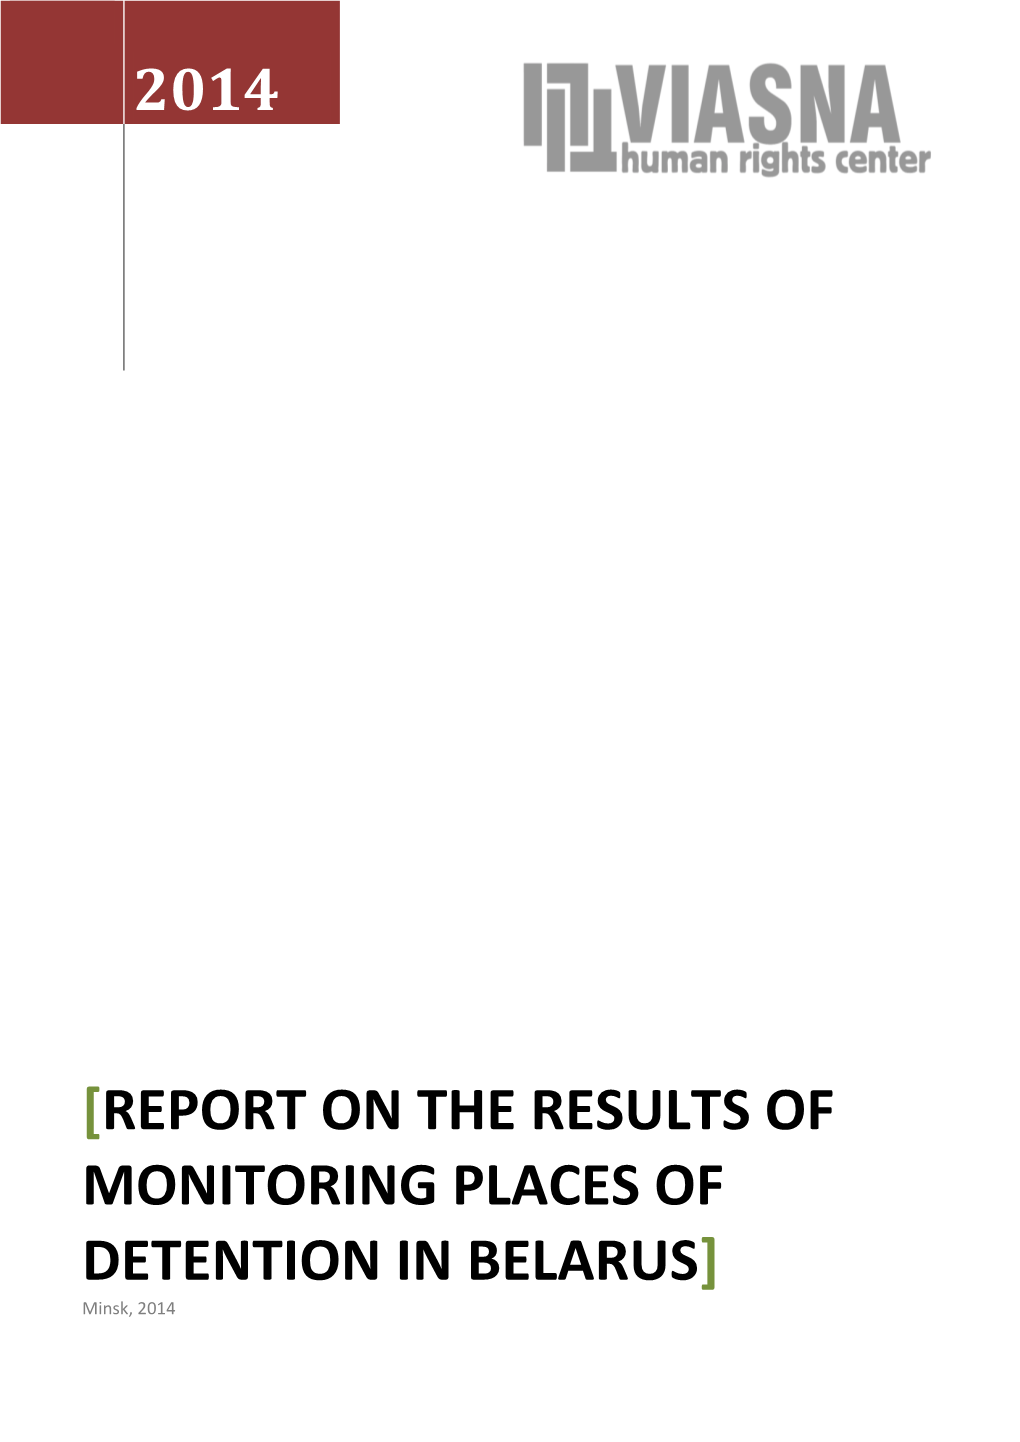 REPORT on the RESULTS of MONITORING PLACES of DETENTION in BELARUS] Minsk, 2014 P a G E | 1